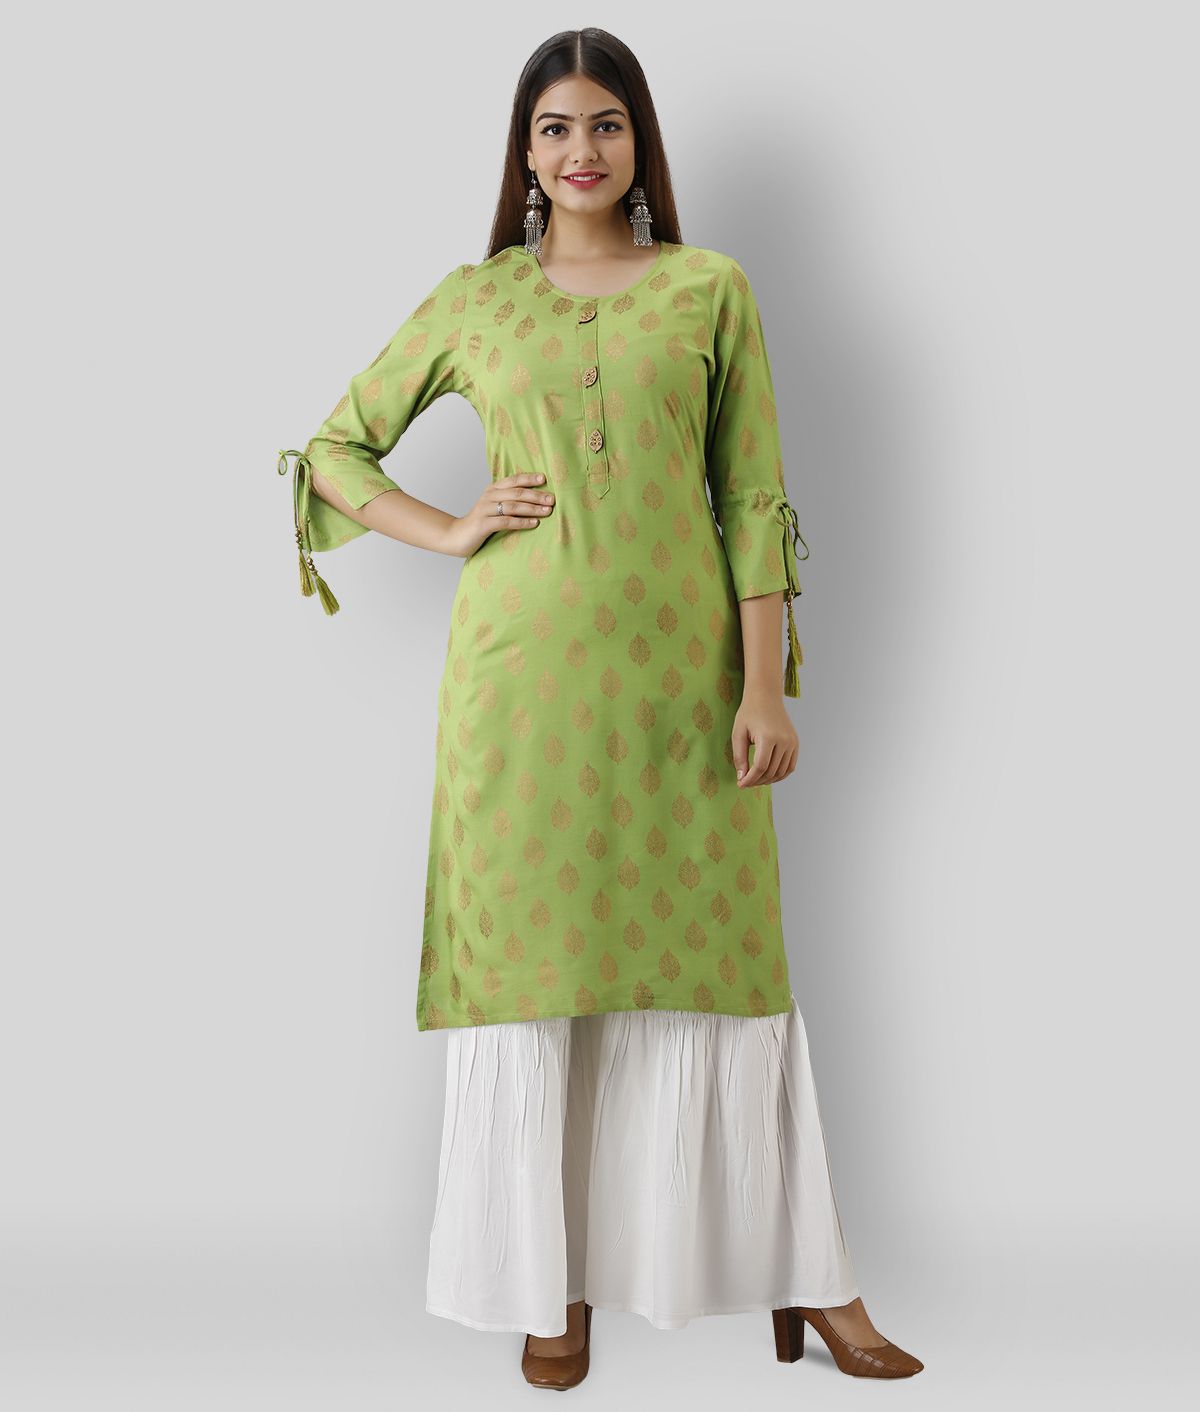 MAUKA - Green Green Straight Rayon Women's Stitched Salwar Suit ( Pack of 1 )